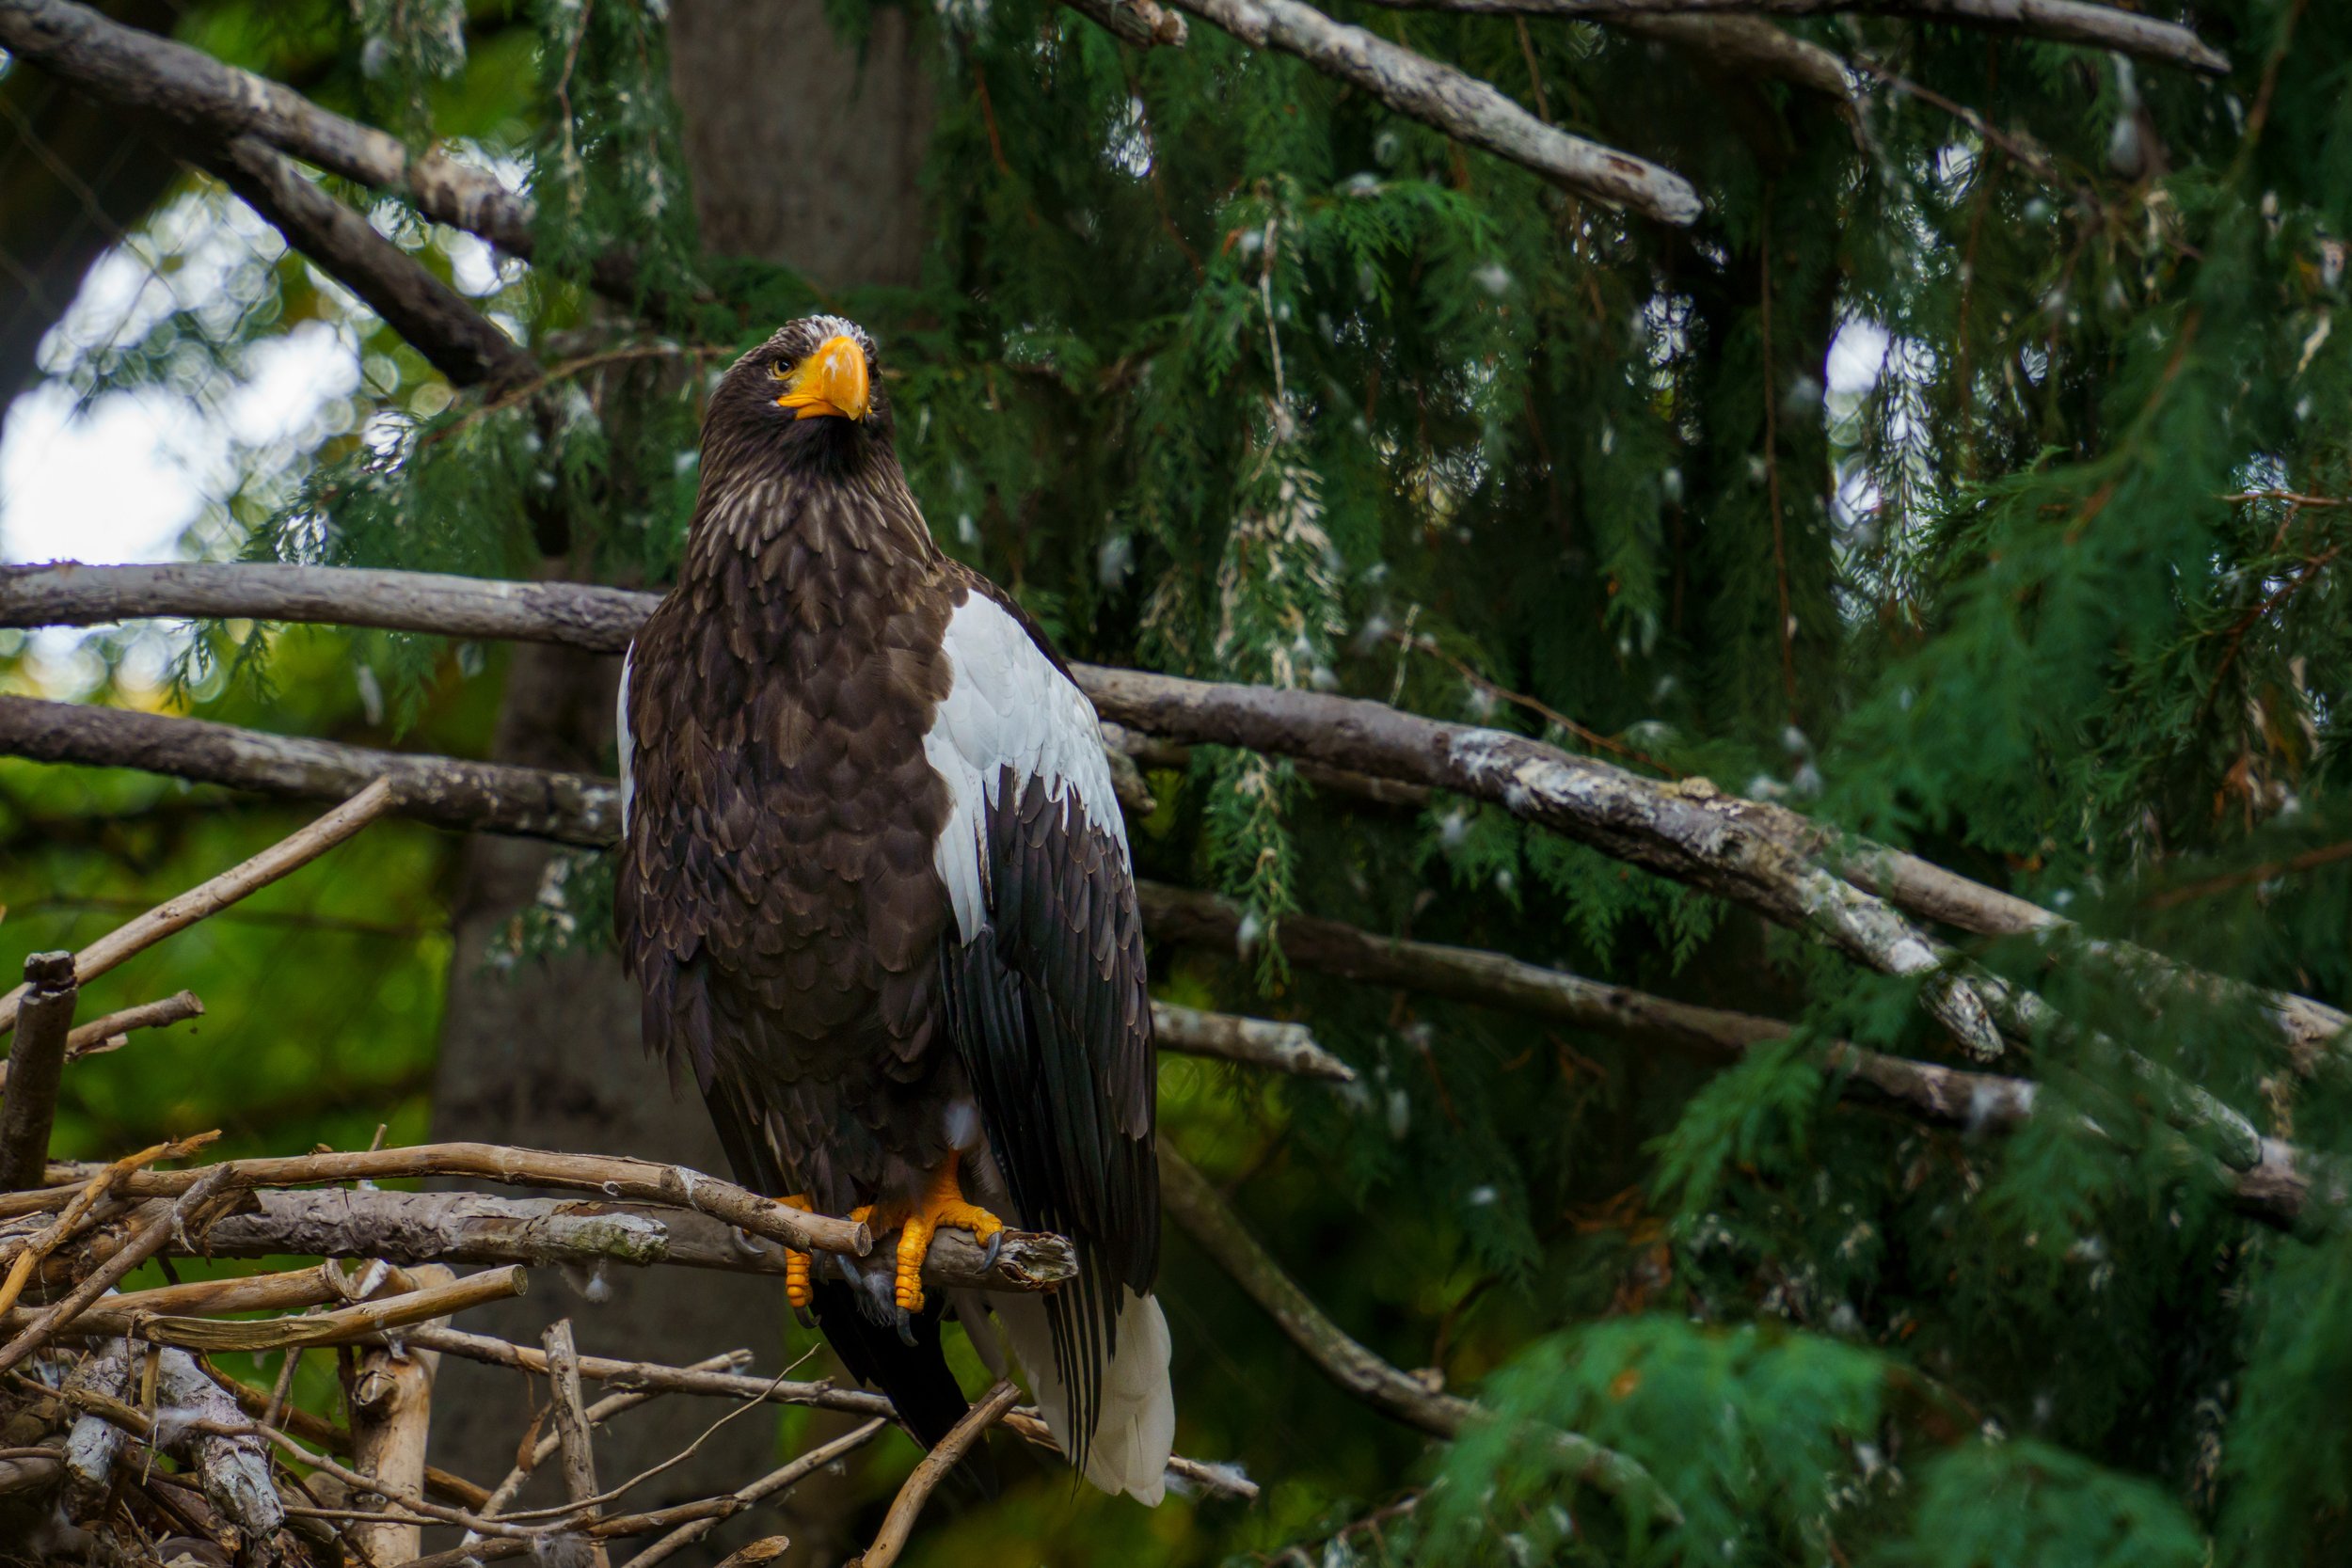  I believe this is a Steller’s sea eagle 